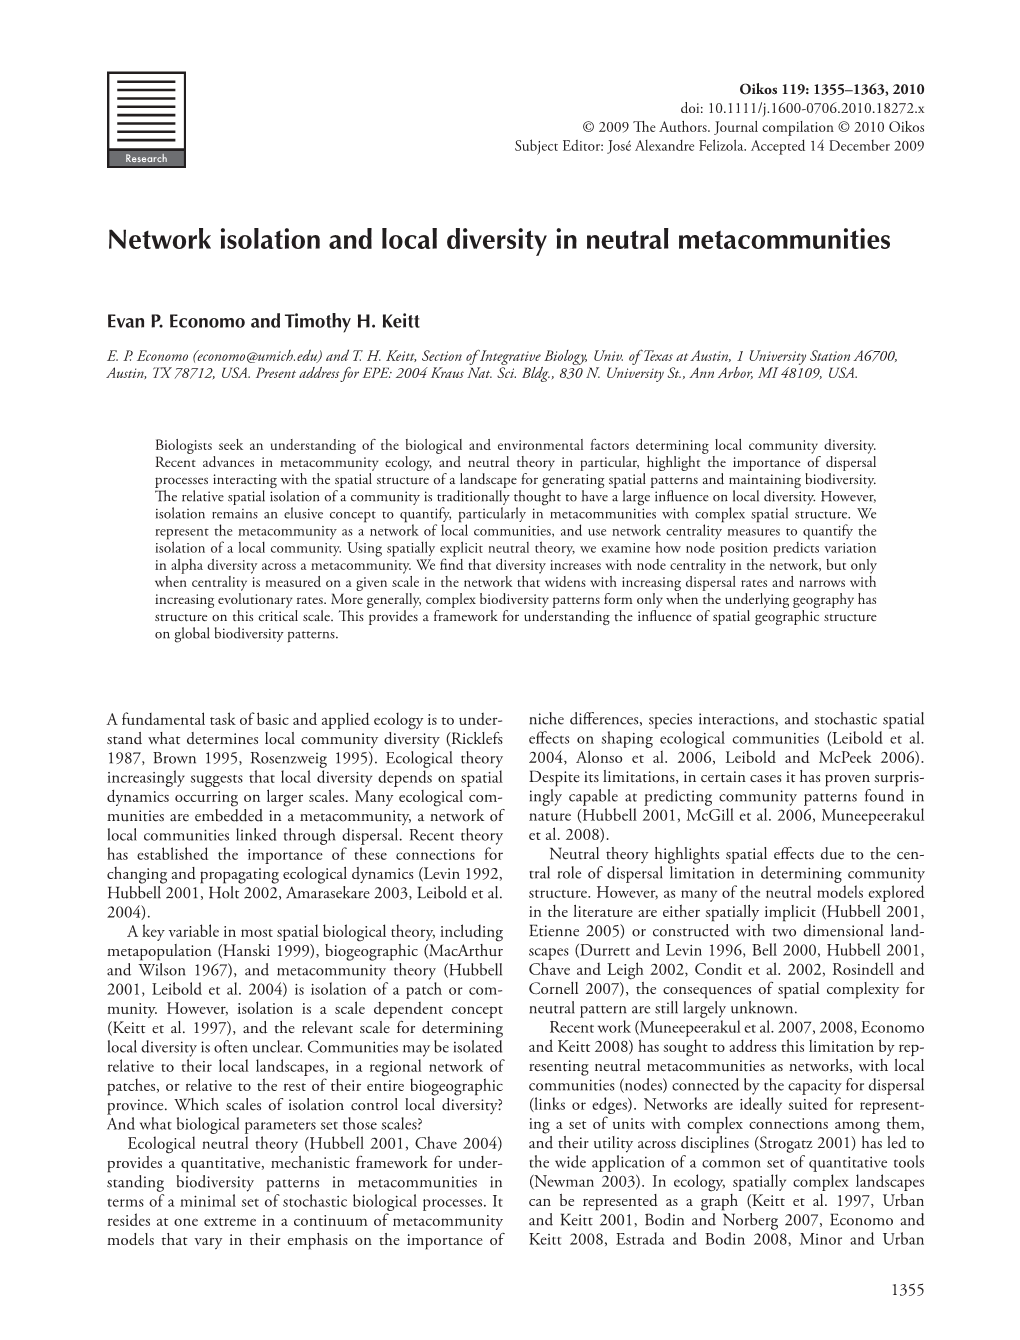 Network Isolation and Local Diversity in Neutral Metacommunities